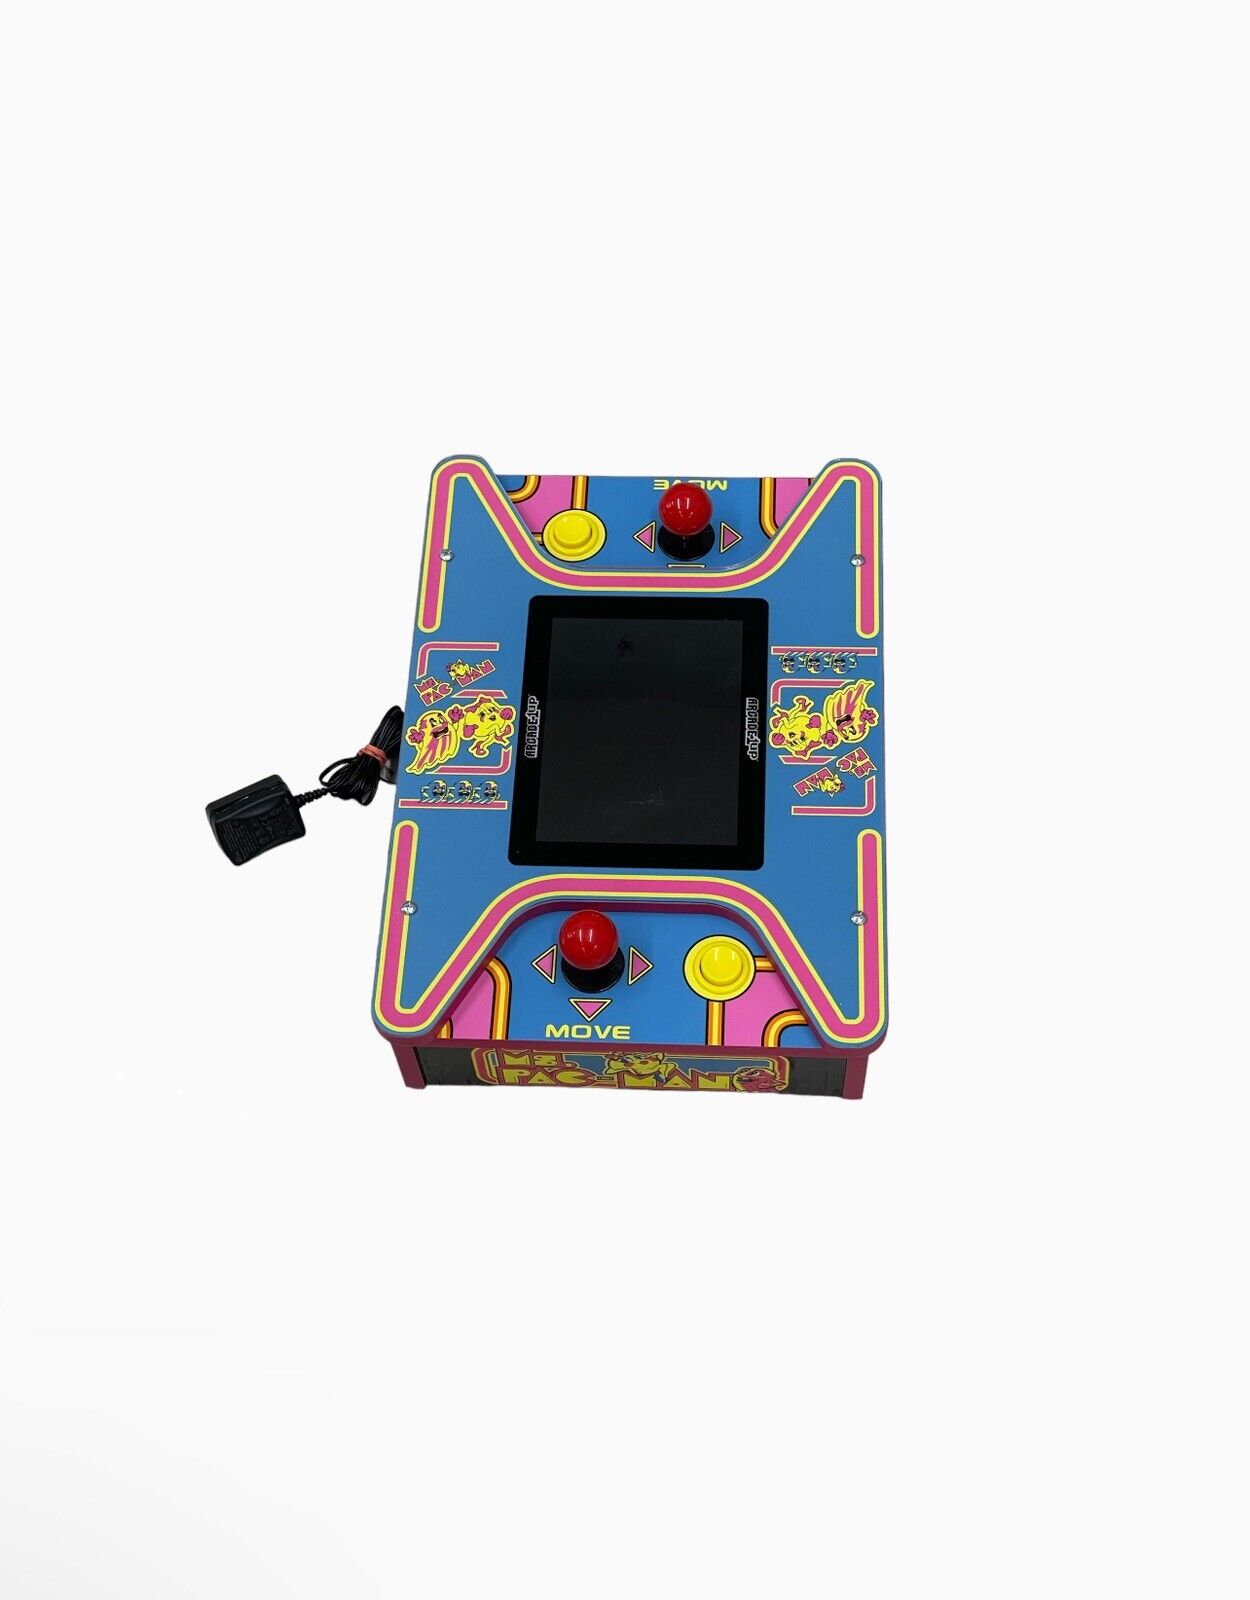 Arcade1UP Bandai Namco Ms. PAC-MAN, 6 Games in 1 Retro Video Game Player WORKS